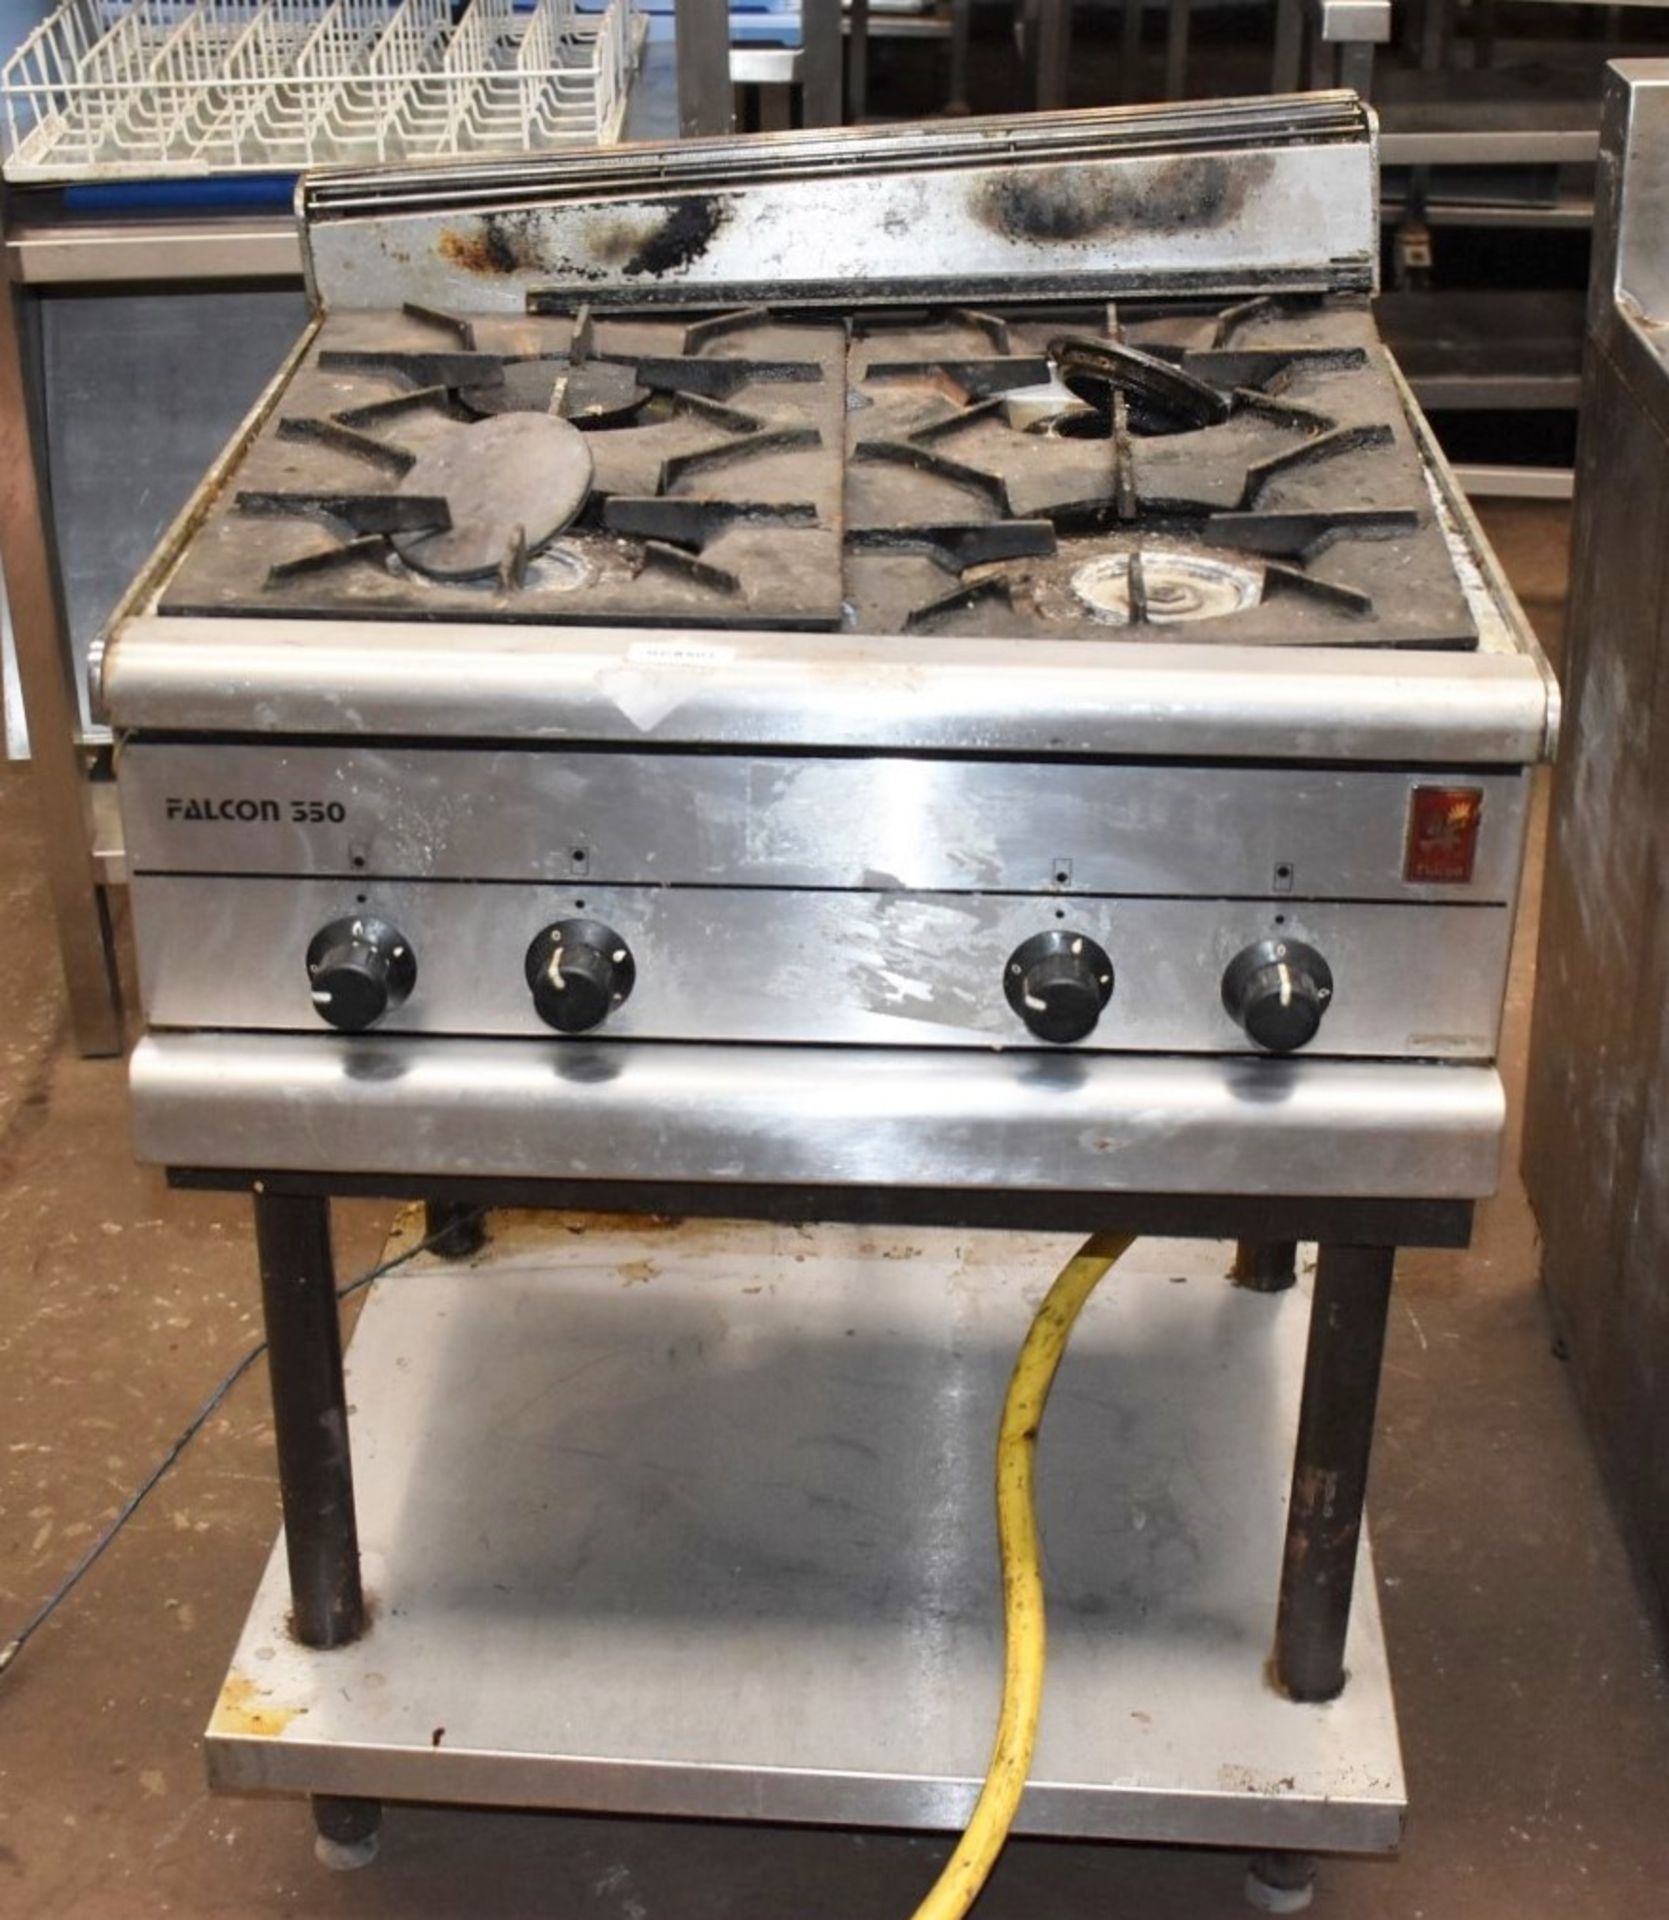 1 x Falcon 4 Burner Gas Range Cooker With Stand - 70cm Width - CL011 - Ref: GCA507 WH5 - Location: